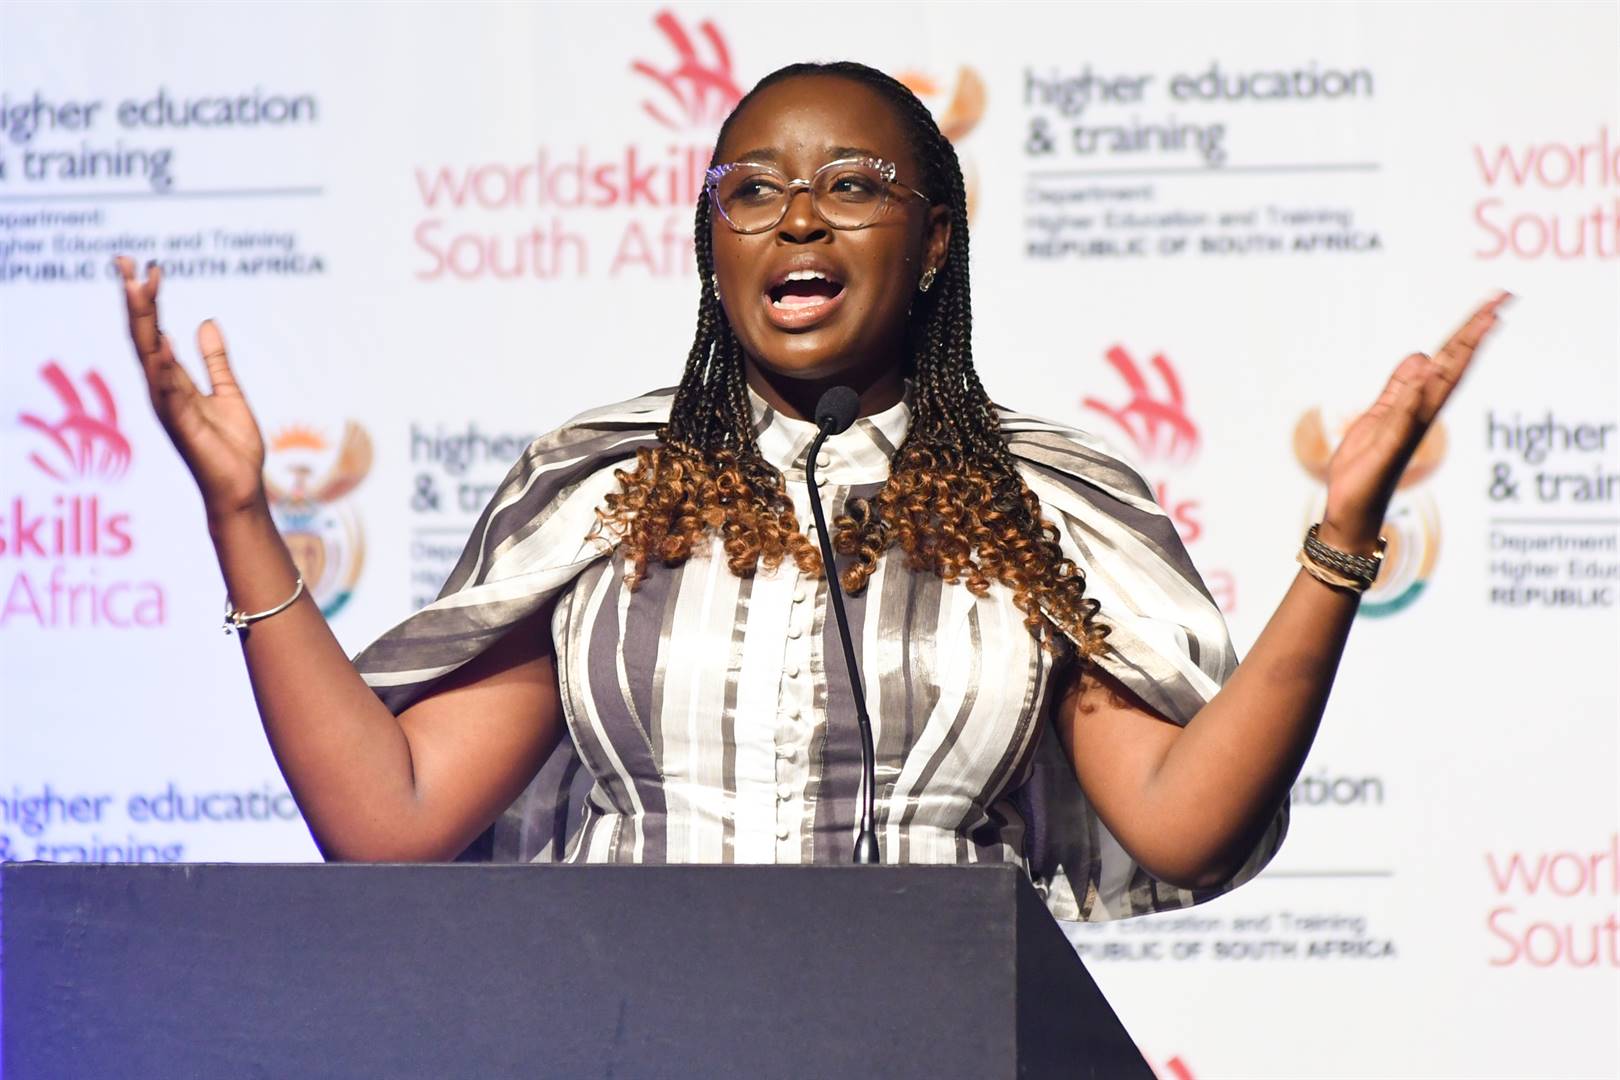 Nompendulo Mkhatshwa is the chairperson of the parliamentary portfolio committee for higher education, science and innovation